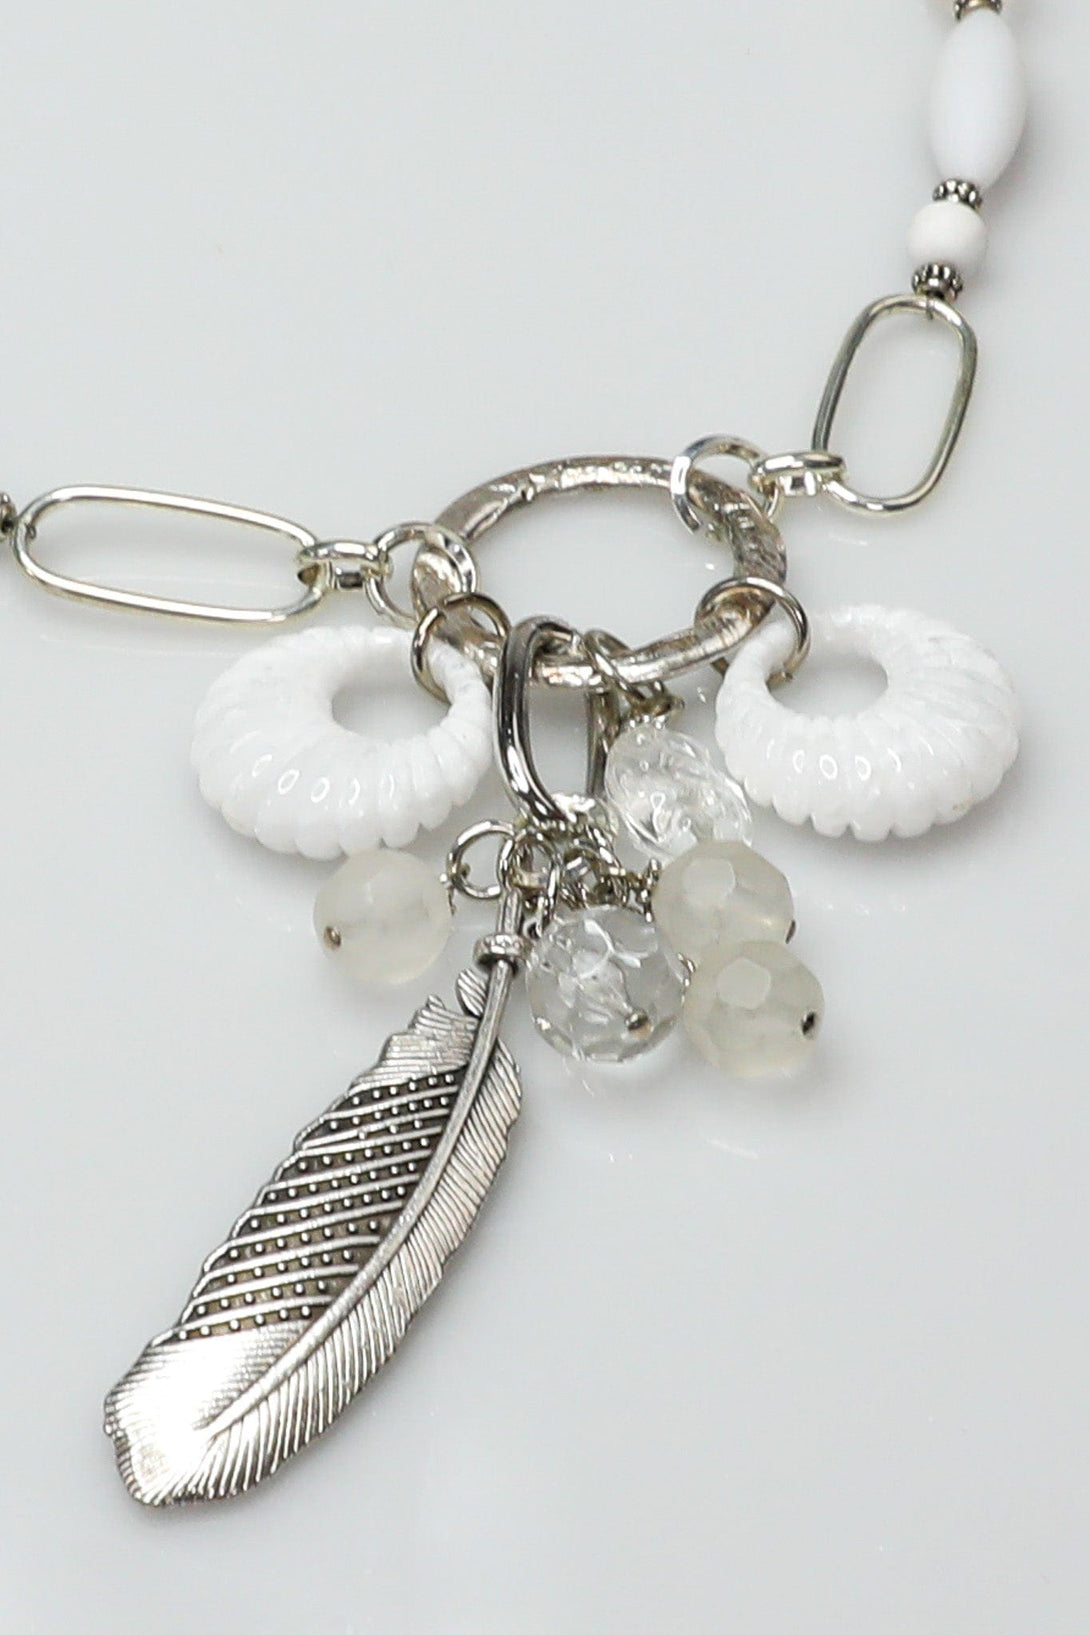 White and Silver Necklace with Feather Accent and Vintage Elements